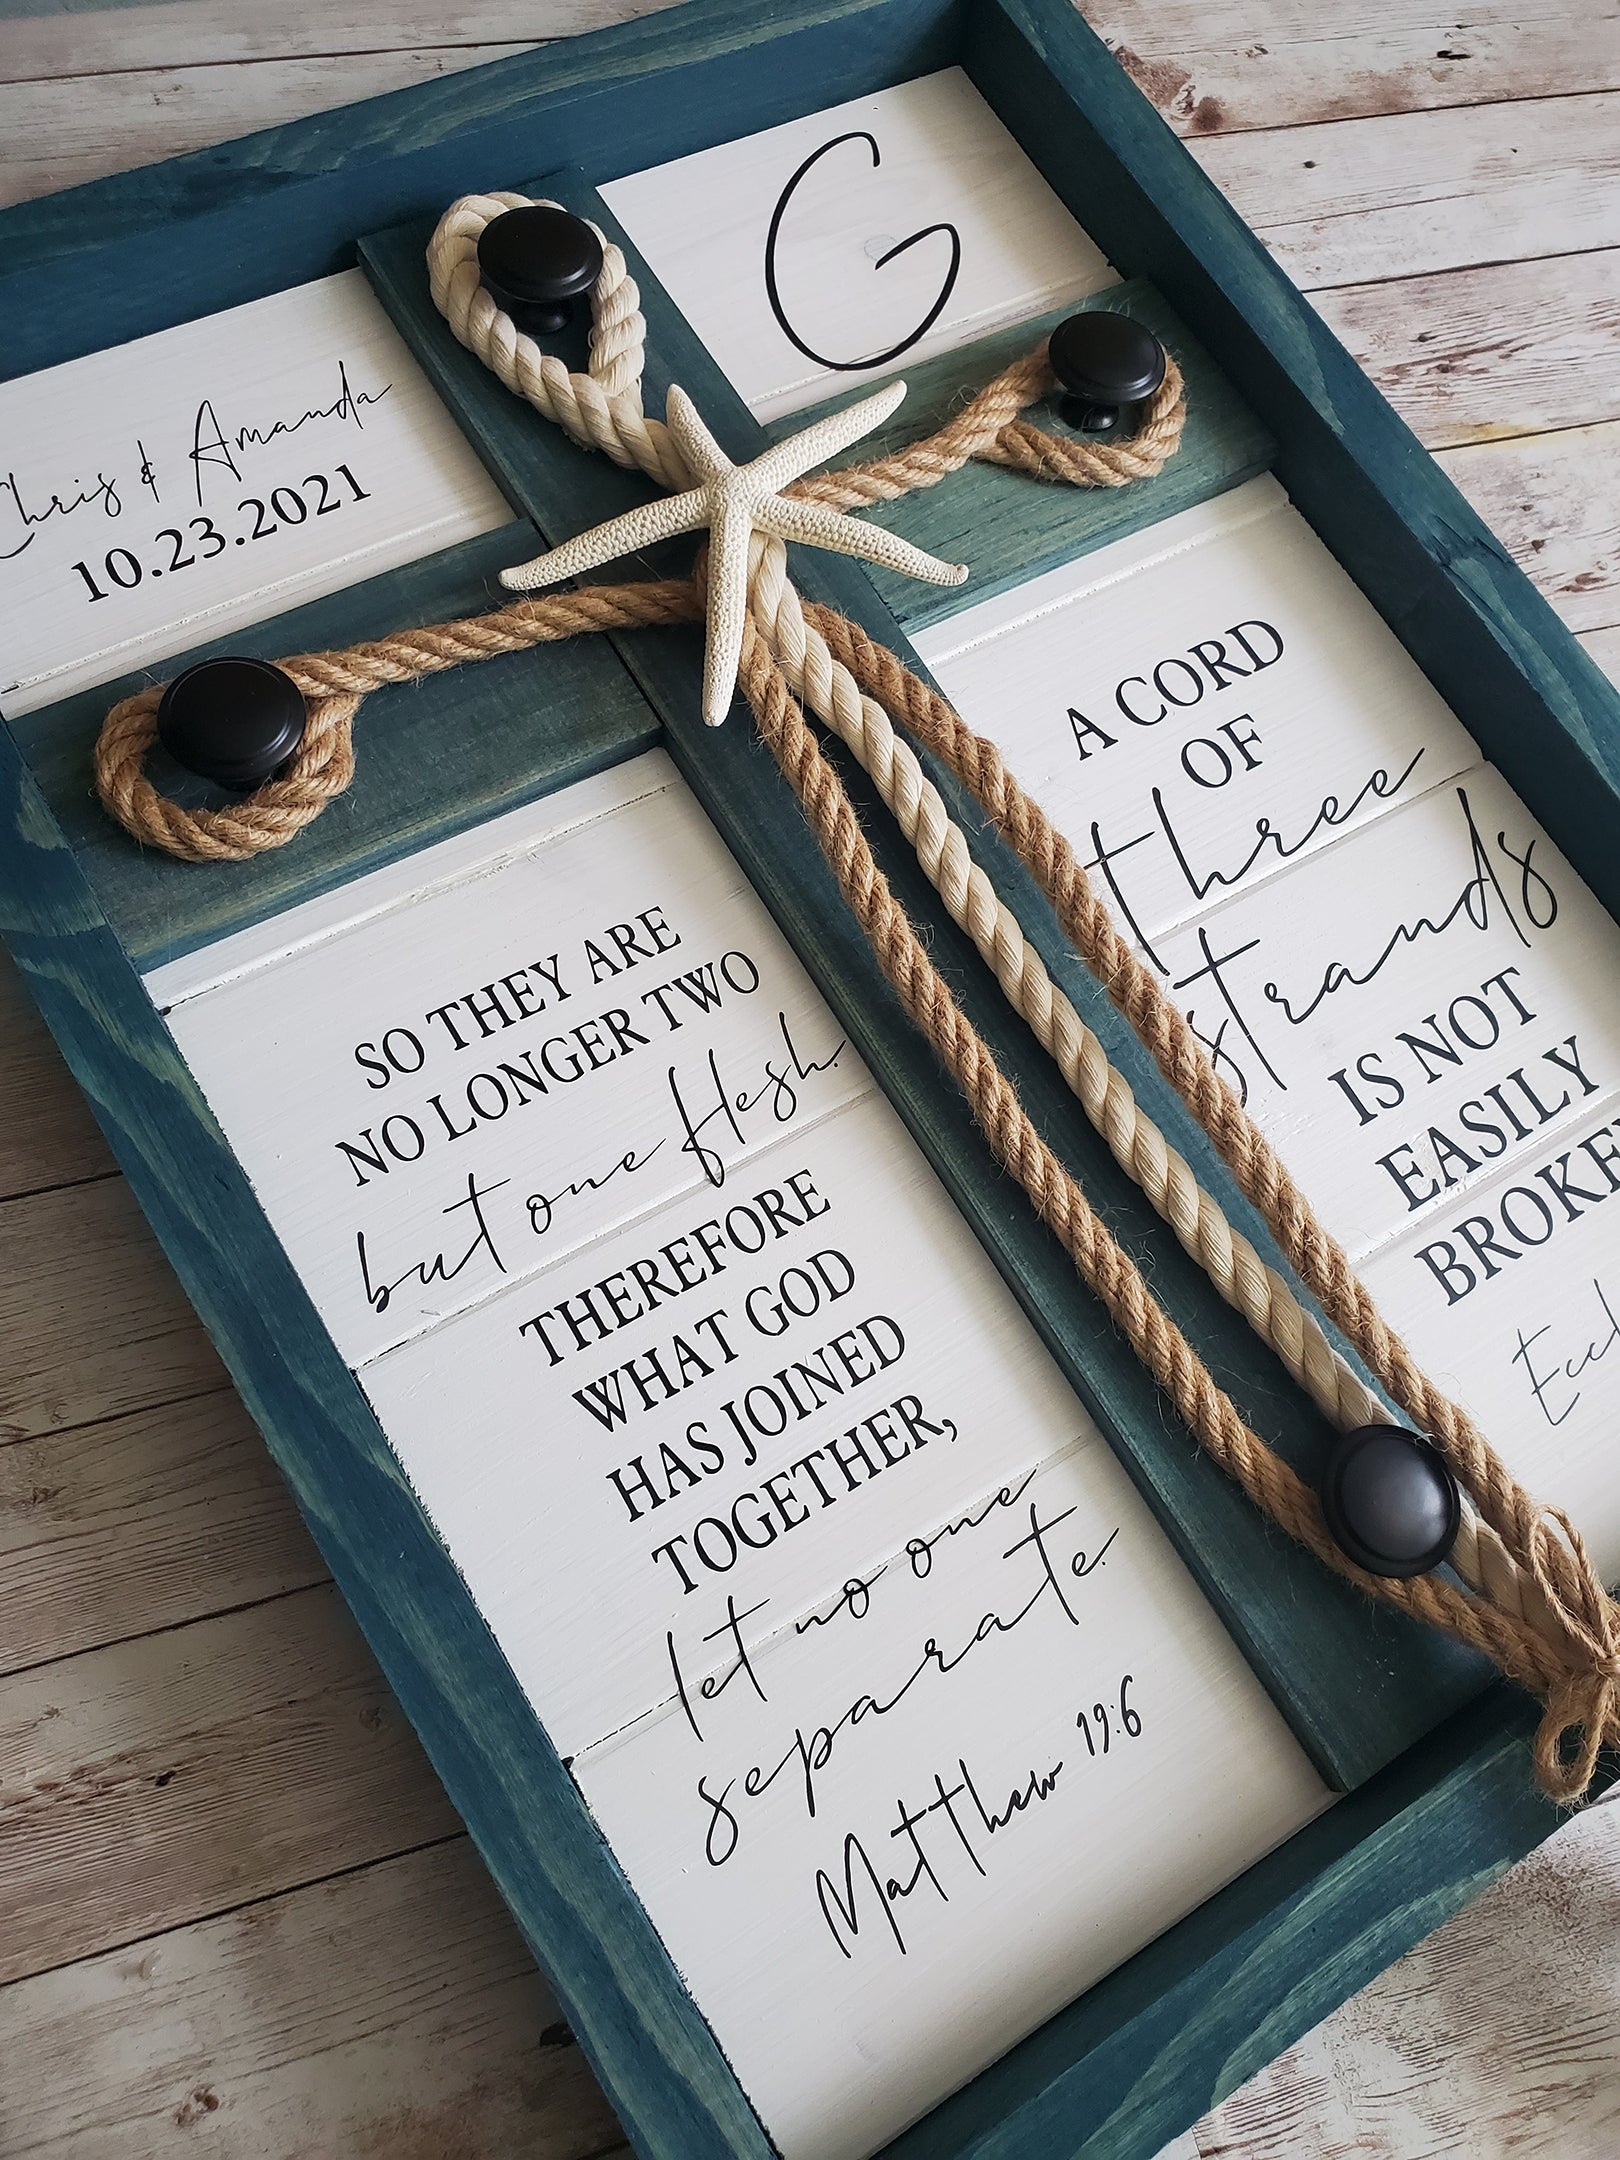 Beach Themed Wedding Sign, Beach Unity Ceremony, Double Verse, A Cord of Three, No Longer Two But One, Unity Ceremony, Wedding Cross